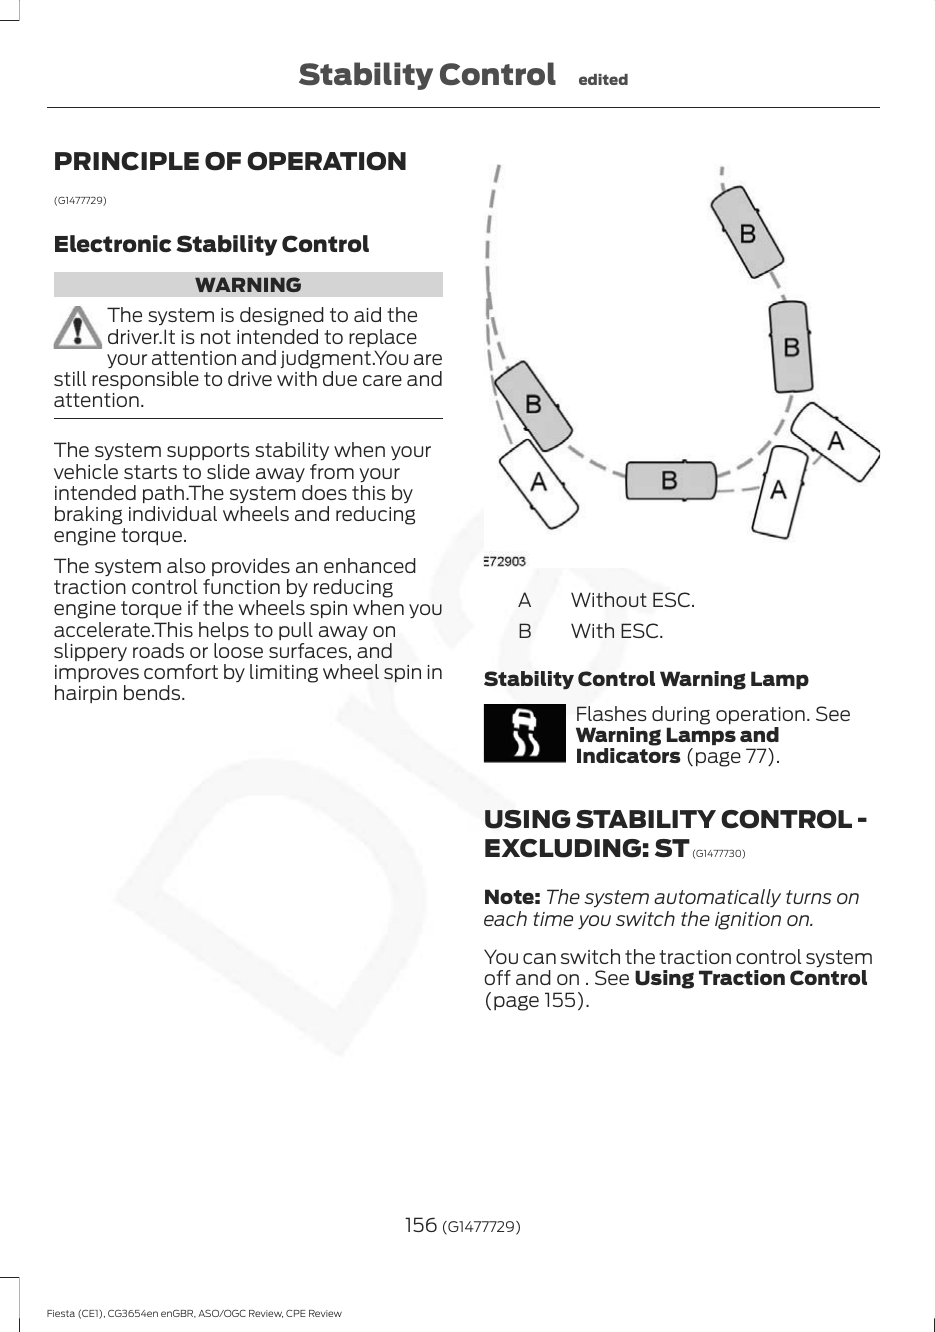 PRINCIPLE OF OPERATION(G1477729)Electronic Stability ControlWARNINGThe system is designed to aid thedriver.It is not intended to replaceyour attention and judgment.You arestill responsible to drive with due care andattention.The system supports stability when yourvehicle starts to slide away from yourintended path.The system does this bybraking individual wheels and reducingengine torque.The system also provides an enhancedtraction control function by reducingengine torque if the wheels spin when youaccelerate.This helps to pull away onslippery roads or loose surfaces, andimproves comfort by limiting wheel spin inhairpin bends.Without ESC.AWith ESC.BStability Control Warning LampFlashes during operation. SeeWarning Lamps andIndicators (page 77).USING STABILITY CONTROL -EXCLUDING: ST (G1477730)Note: The system automatically turns oneach time you switch the ignition on.You can switch the traction control systemoff and on . See Using Traction Control(page 155).156 (G1477729)Fiesta (CE1), CG3654en enGBR, ASO/OGC Review, CPE ReviewStability Control edited